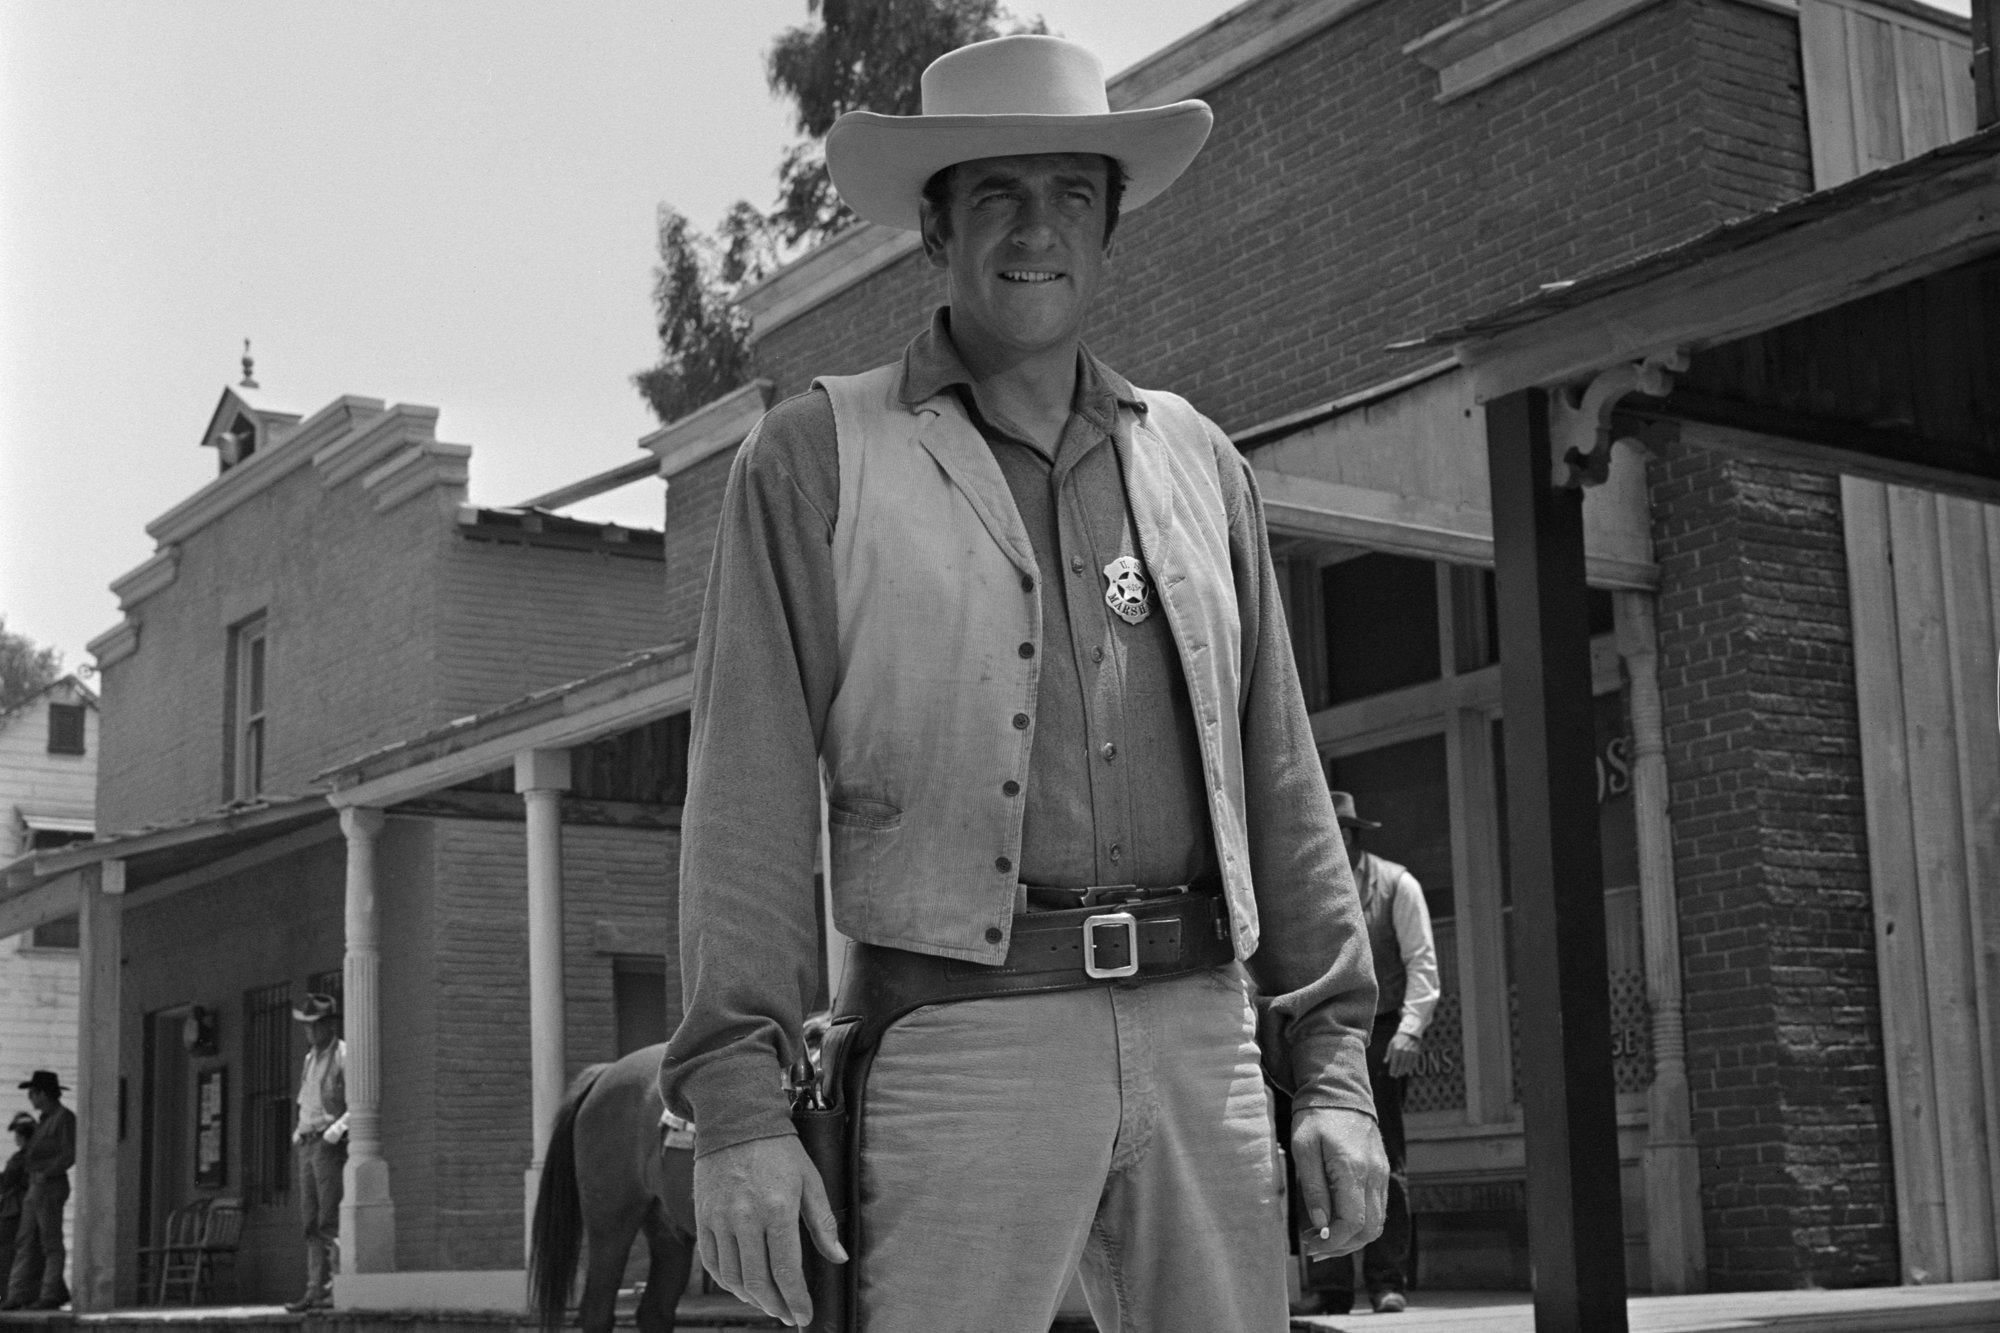 'Gunsmoke' James Arness as U.S. Marshal Matt Dillon in front of Dodge City buildings in a black-and-white picture, wearing a Western costume